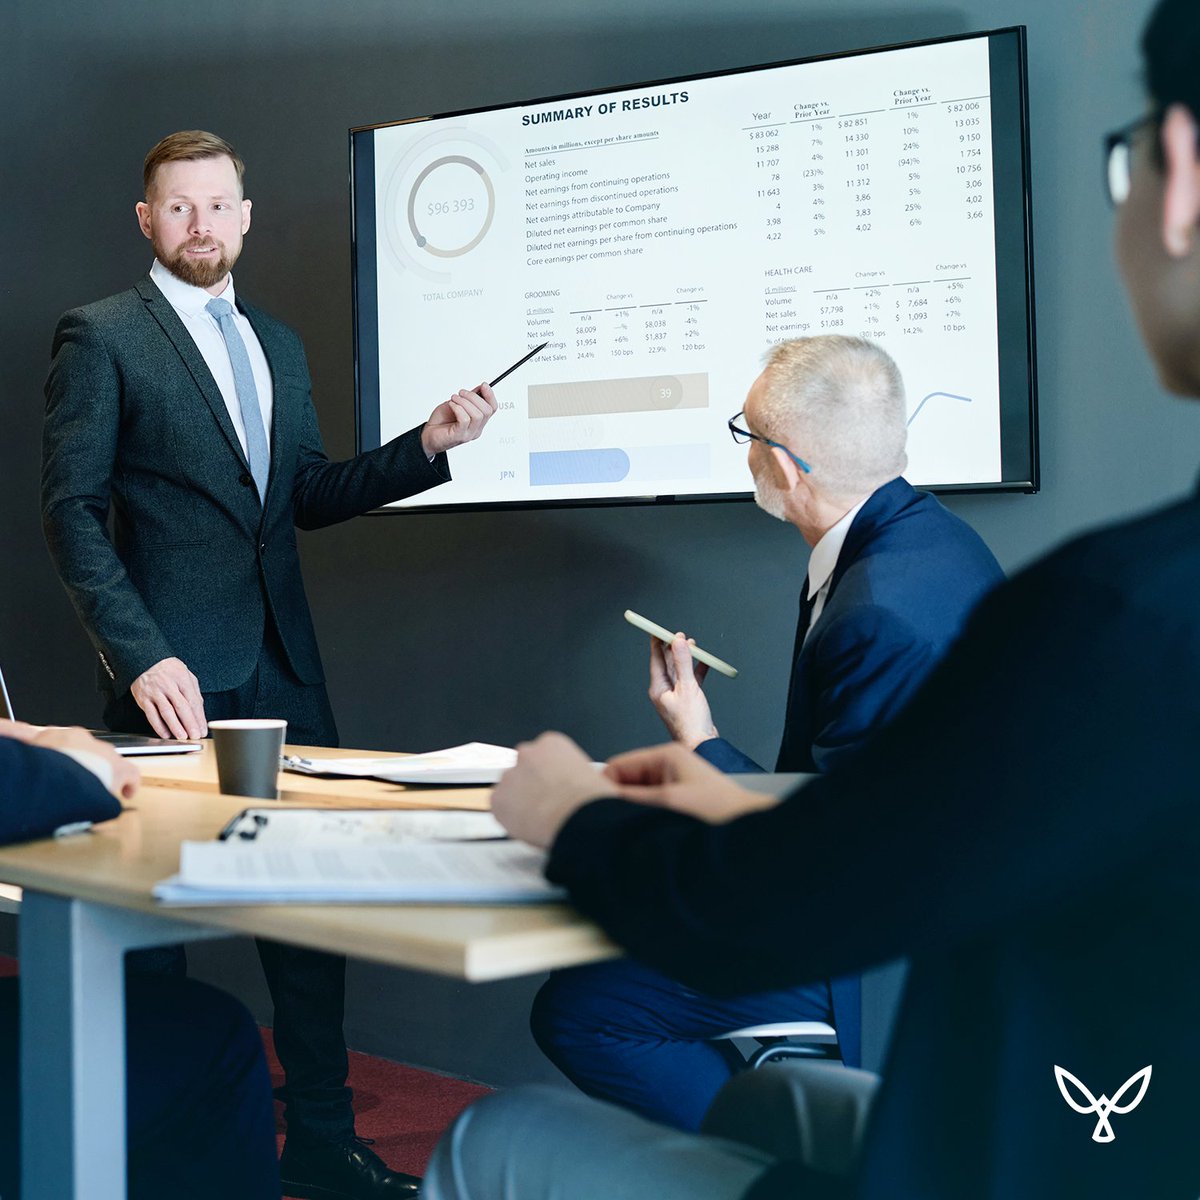 Revamp your office setup with the Skylarx Screenshare device and experience seamless wireless content sharing in stunning 4K quality. ⚡️ Shop now - skylarxtech.com 🌟 #publicspeaking #publicspeaker #businessmeetings